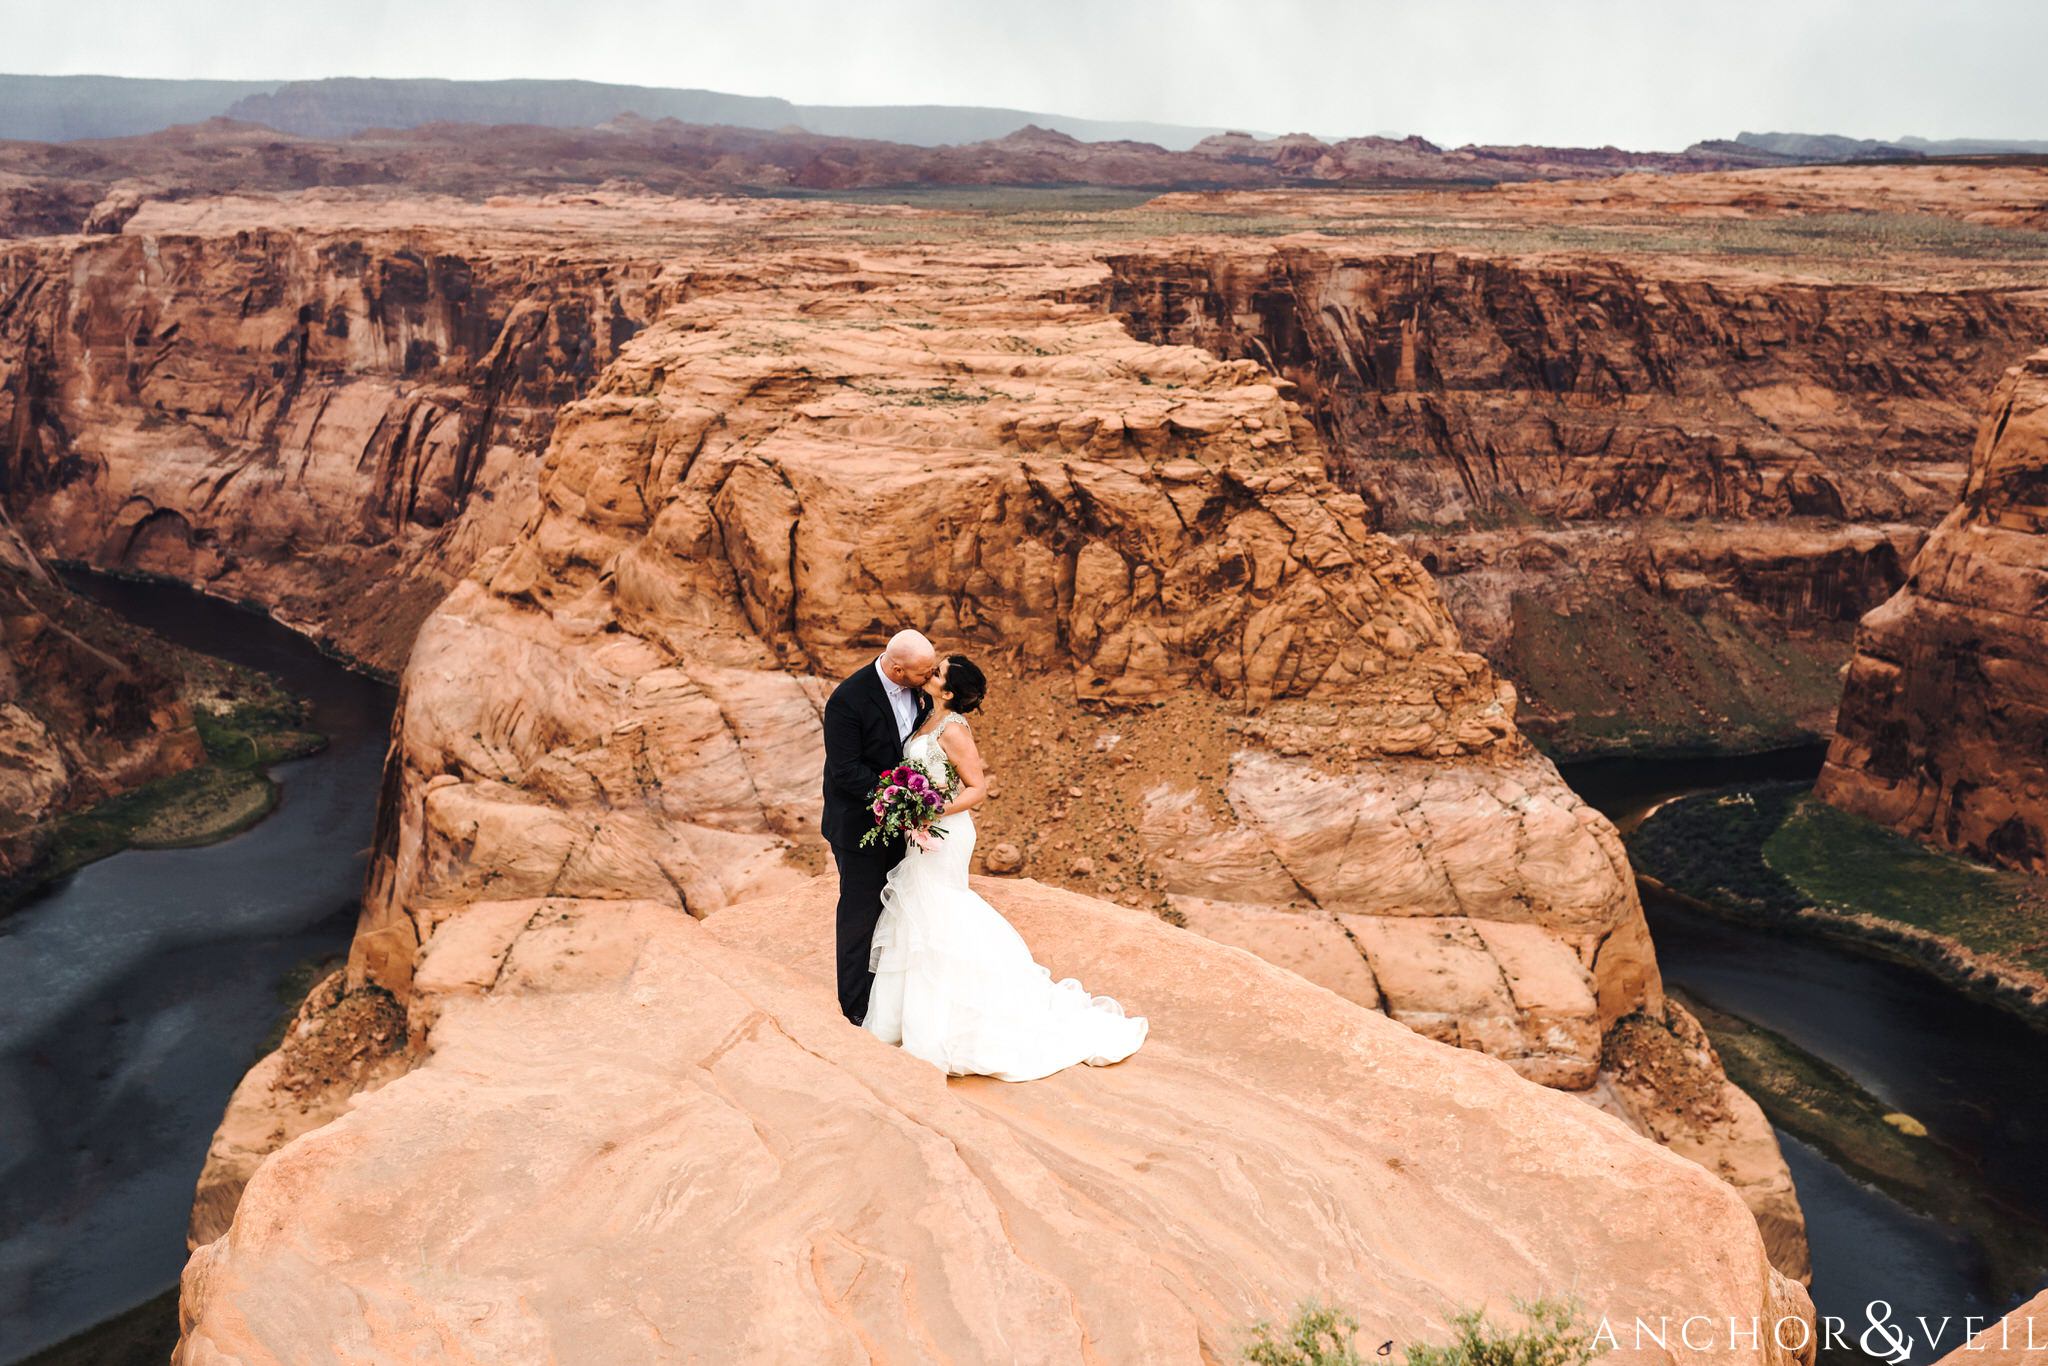 kissing on the edge during their Horseshoe Bend Elopement Wedding